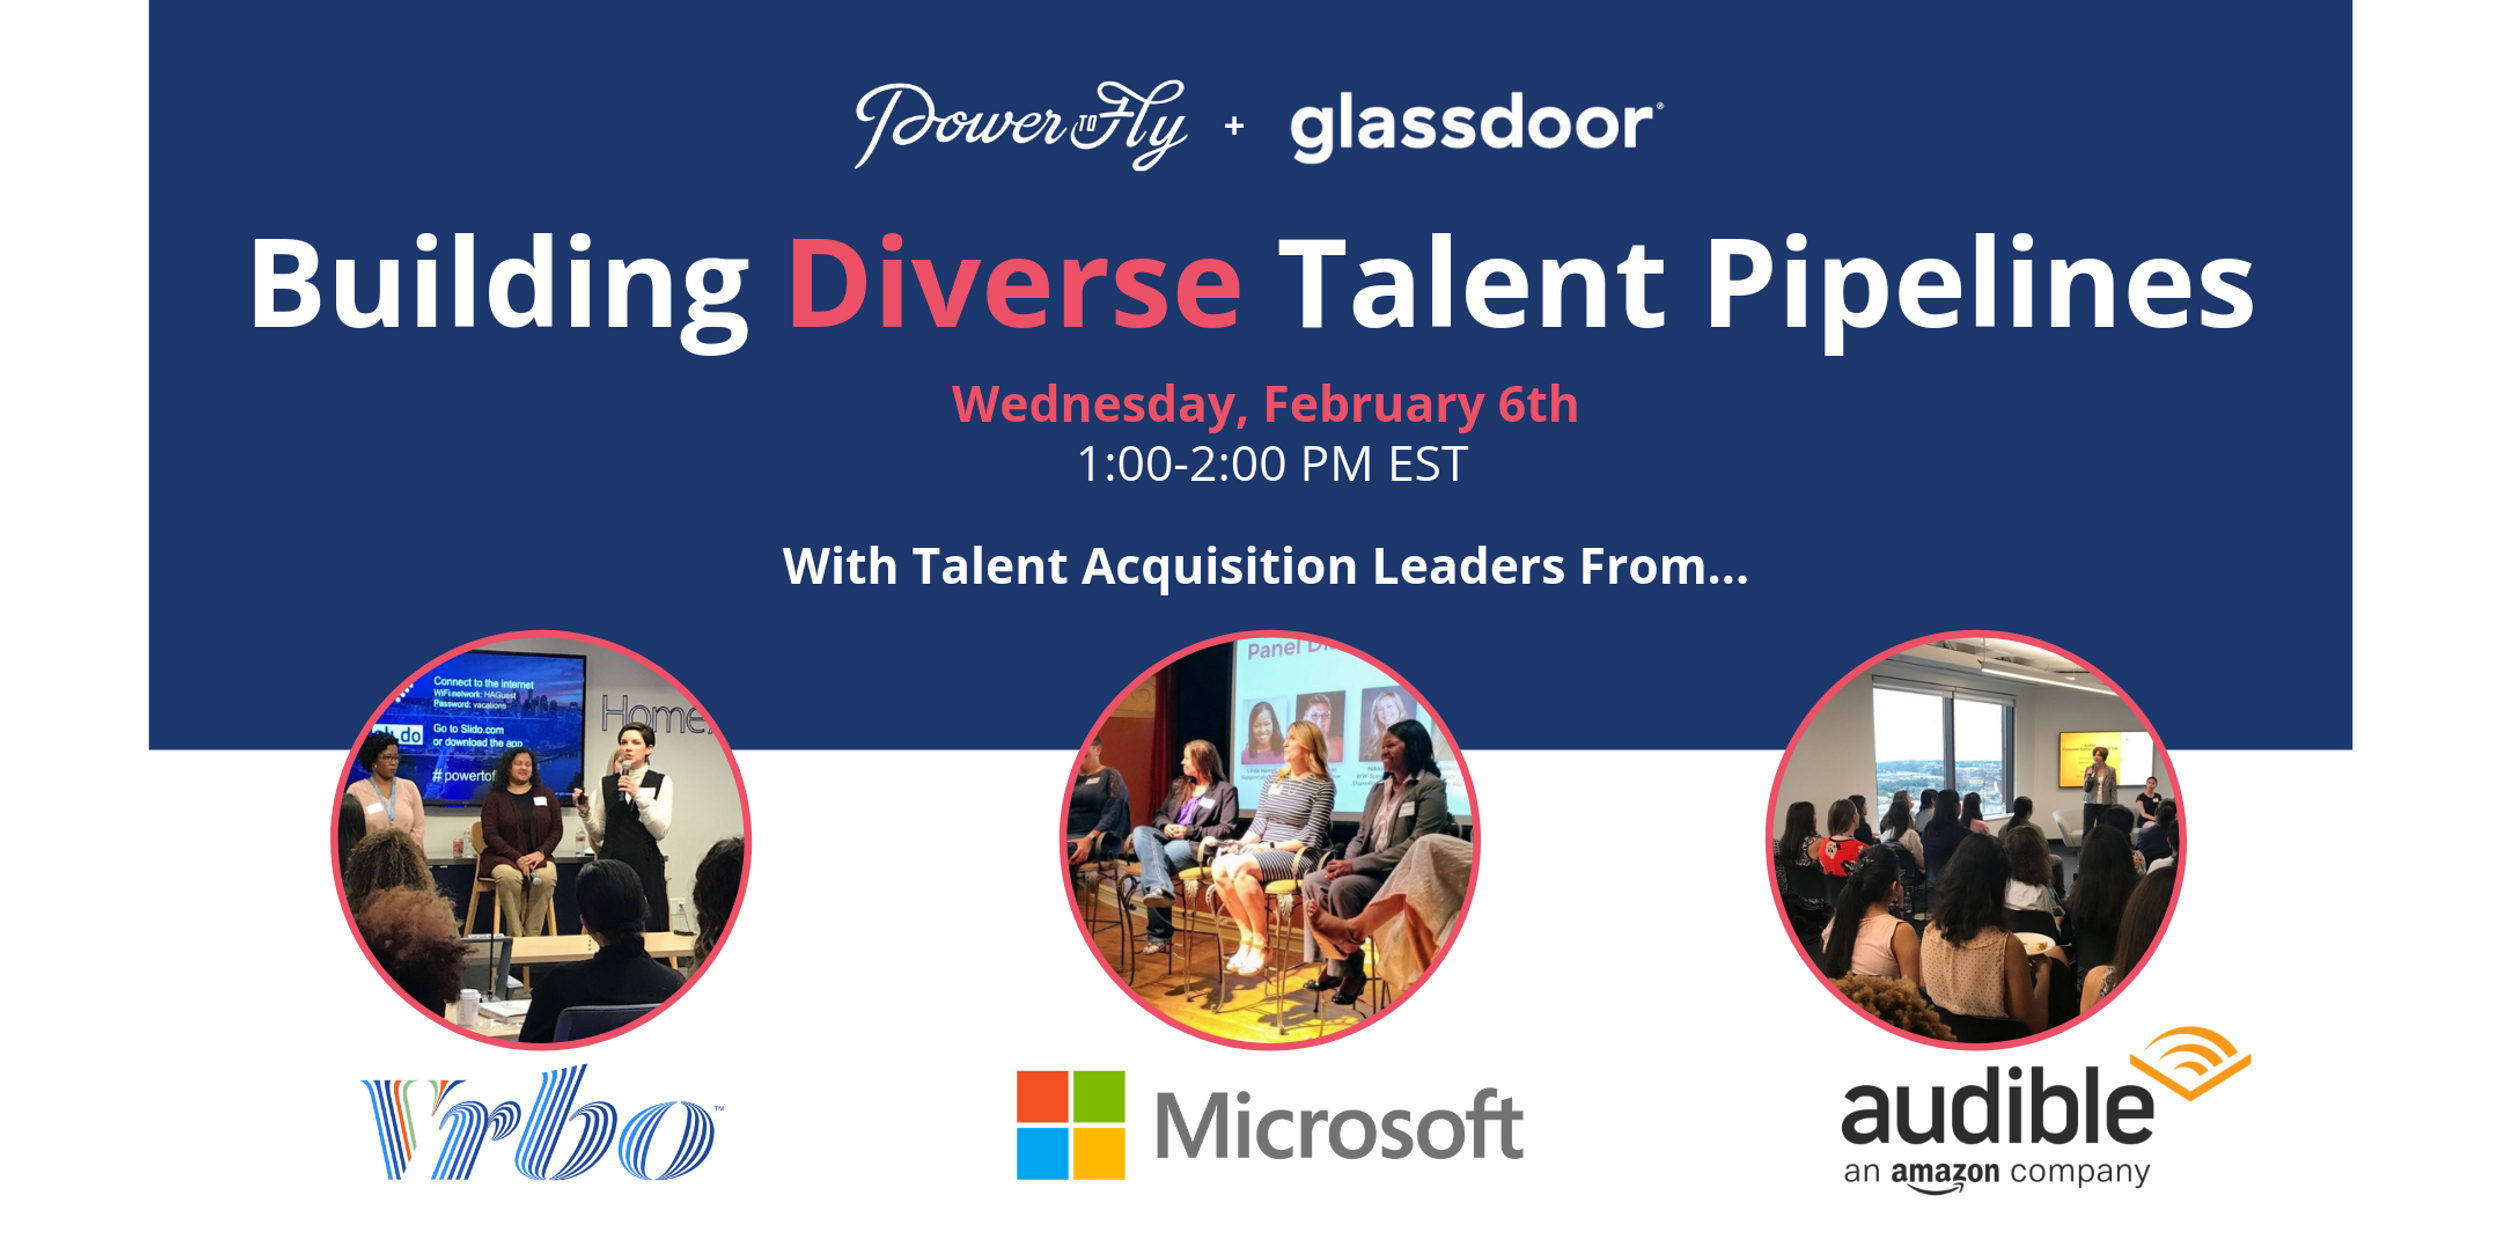 Audible, Microsoft & Vrbo (formerly HomeAway) Leaders On Building Diverse Talent Pipelines